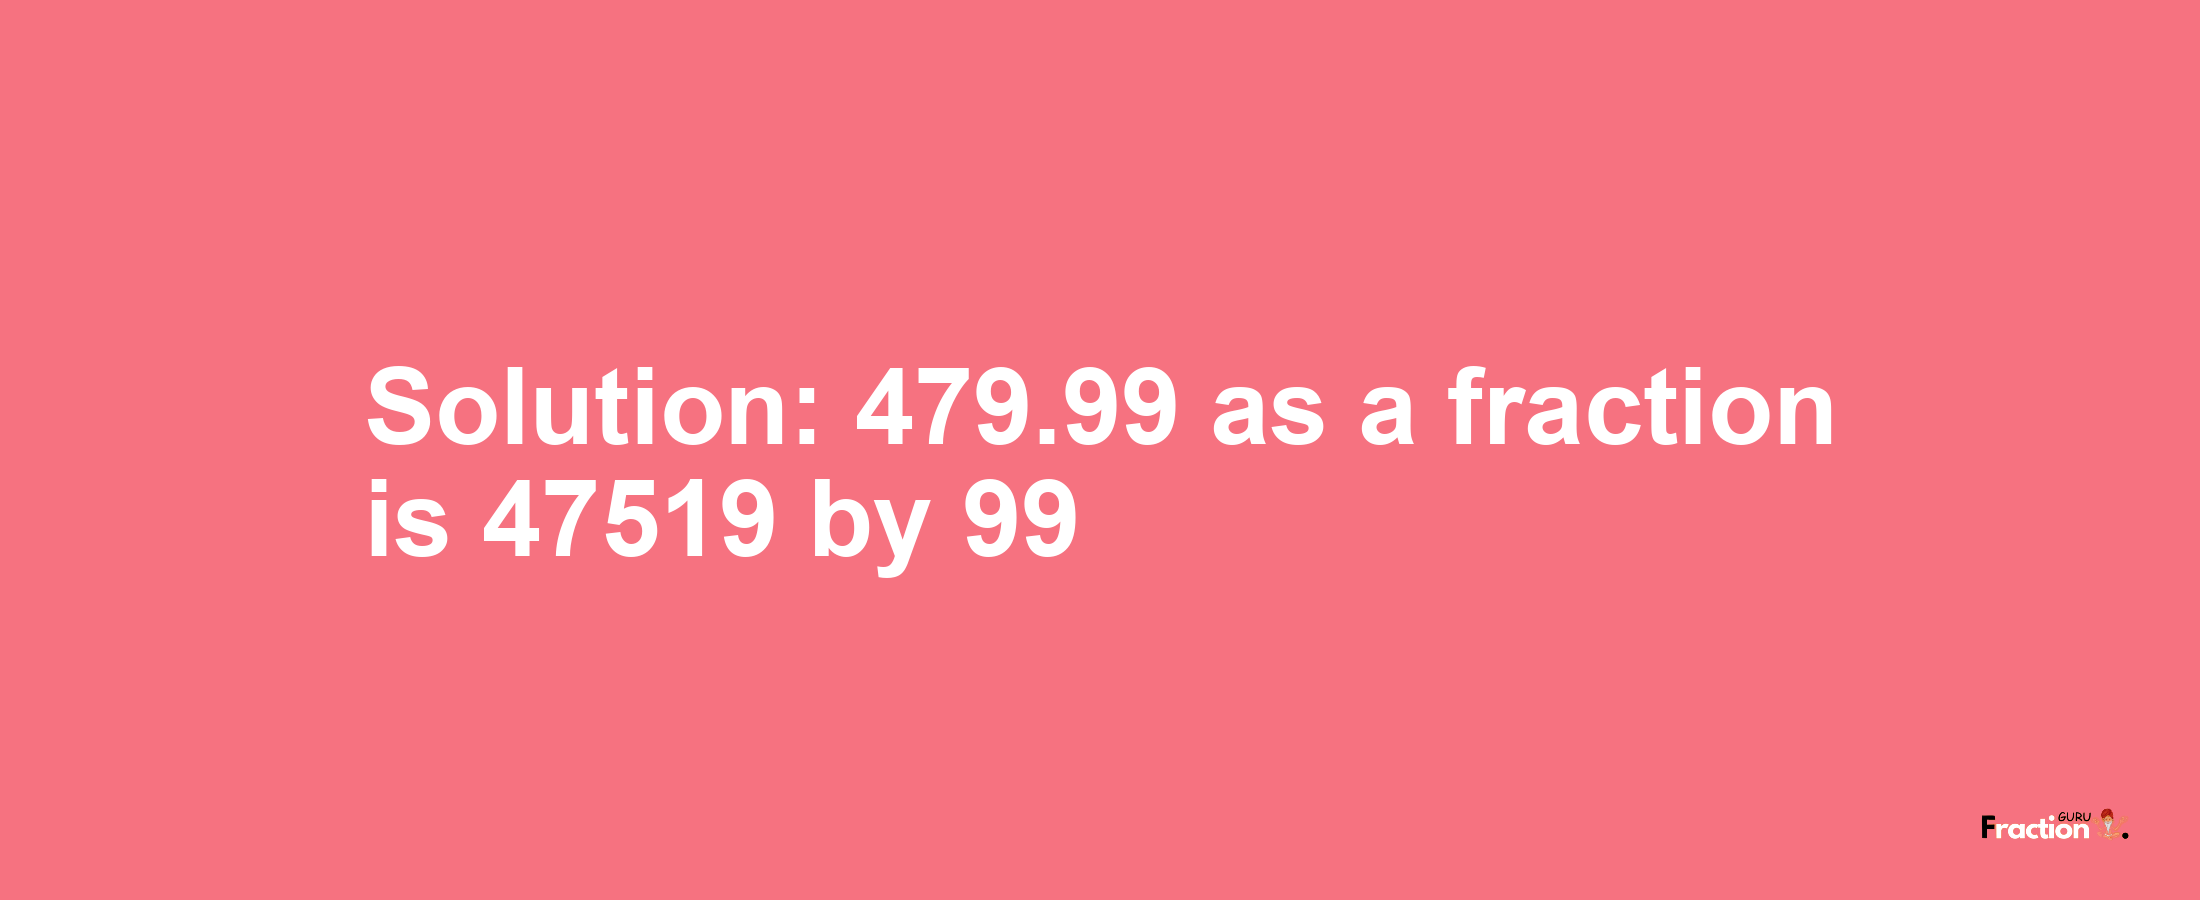 Solution:479.99 as a fraction is 47519/99